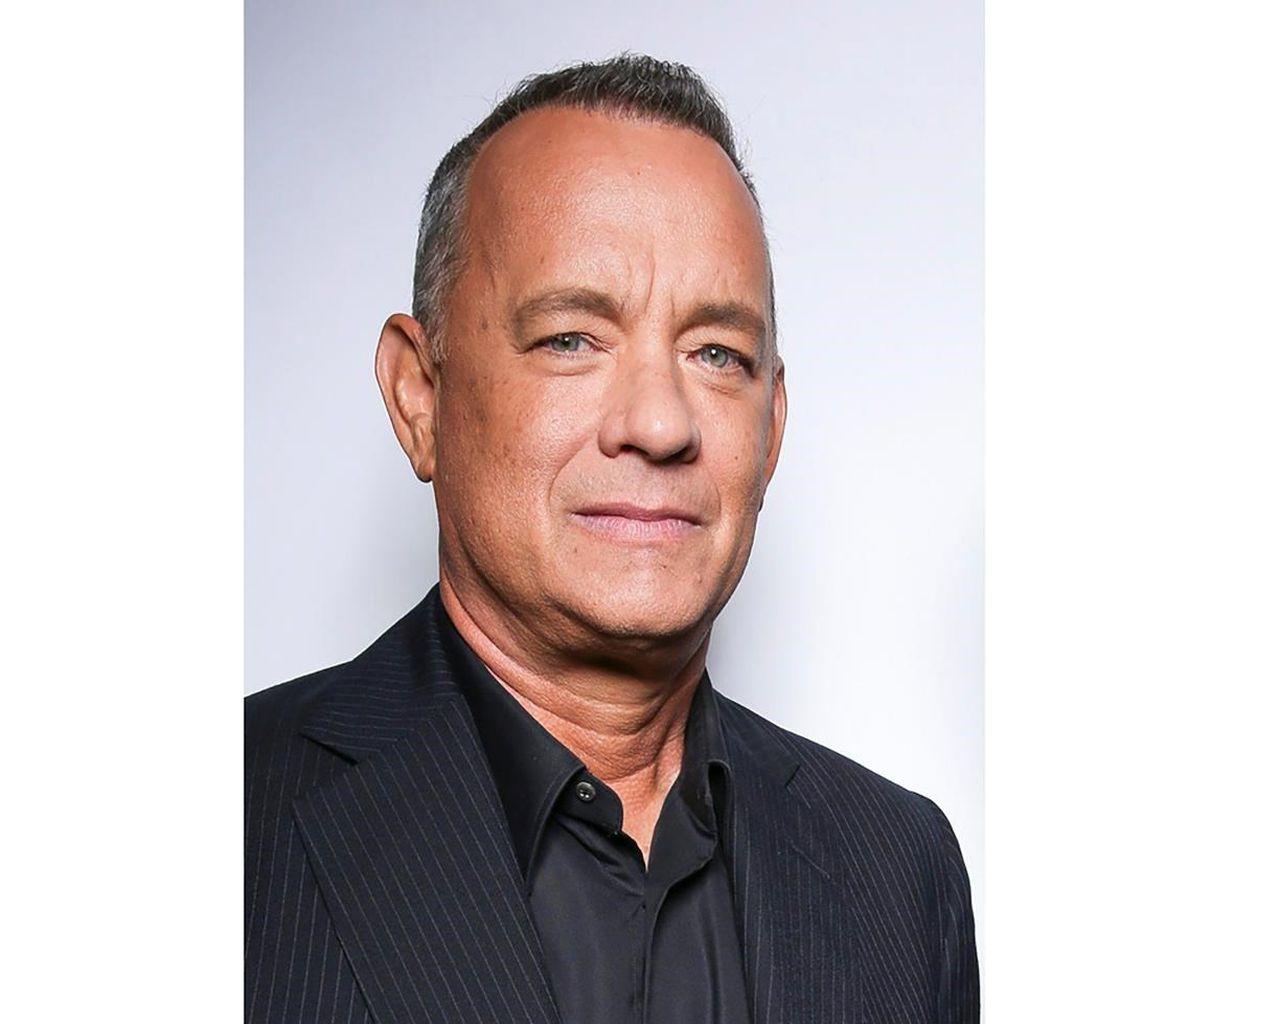 Tom Hanks to receive Cecil B. DeMille Award at Golden Globes